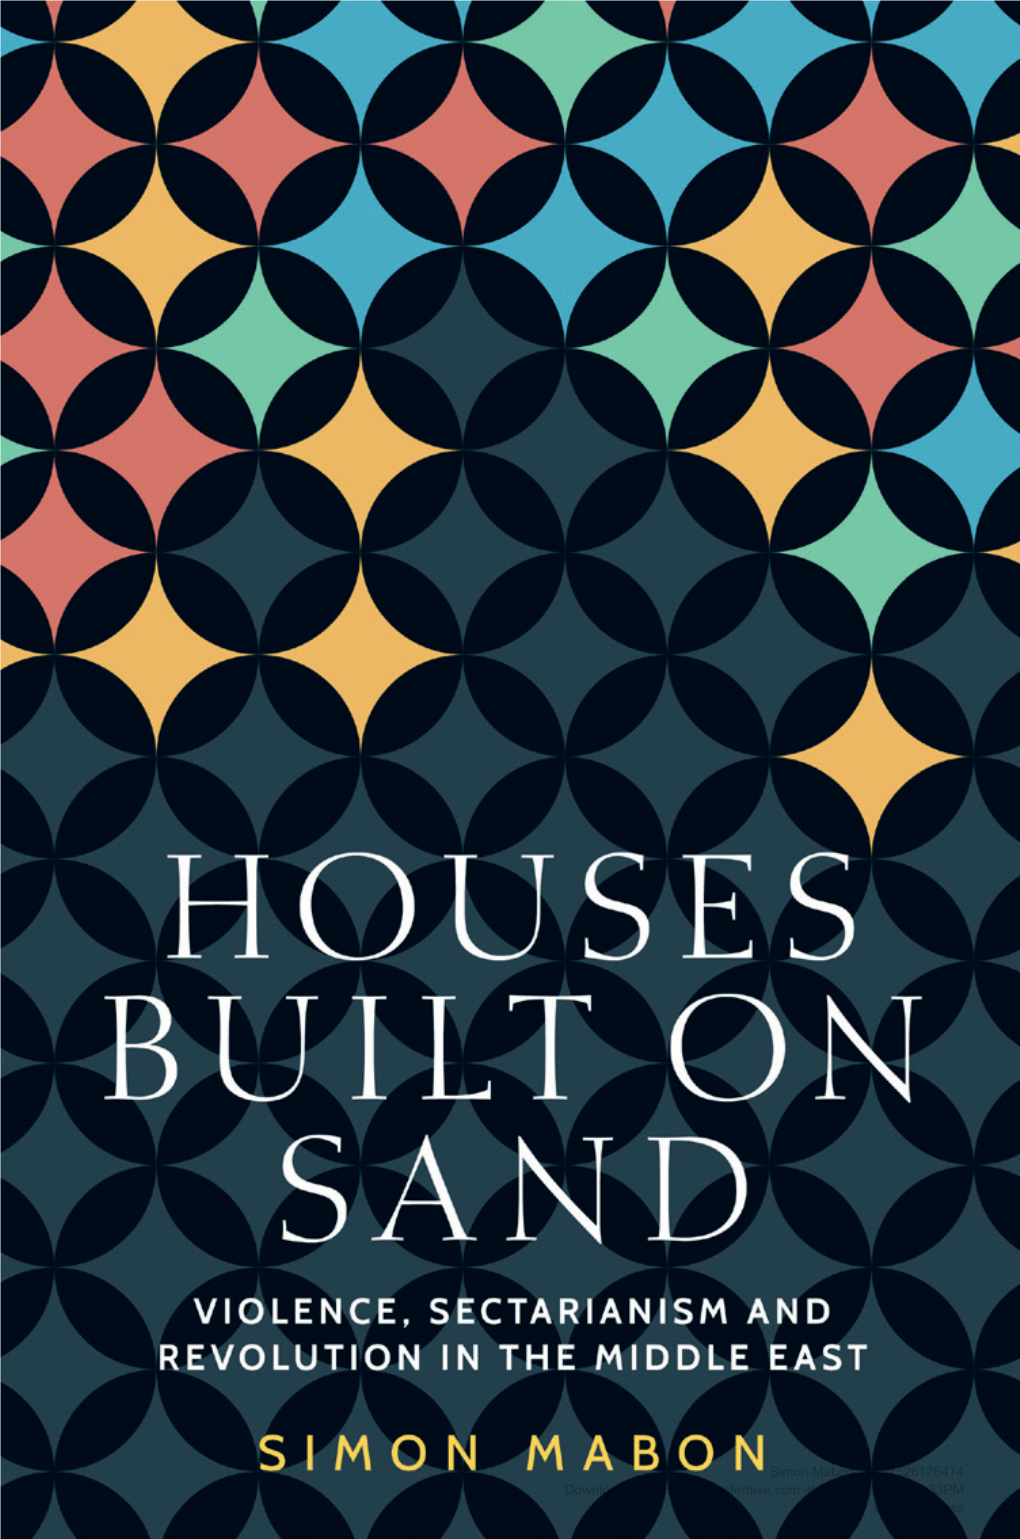 Houses Built on Sand: Violence, Sectarianism and Revolution in The